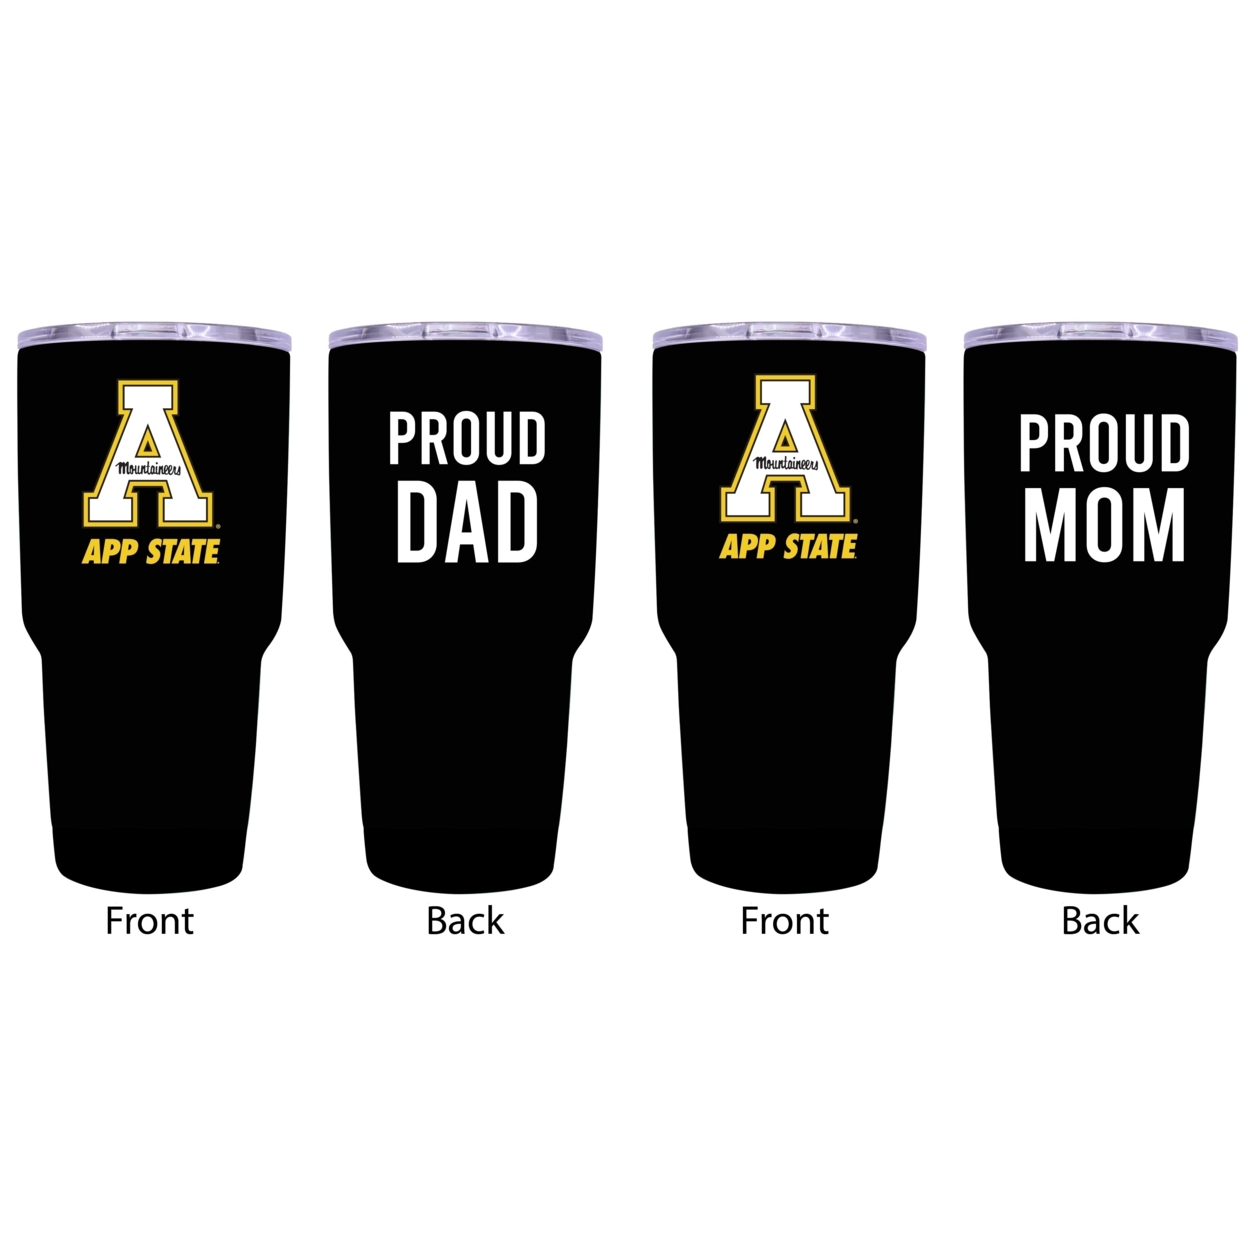 Appalachian State Proud Mom And Dad 24 Oz Insulated Stainless Steel Tumblers 2 Pack Black.